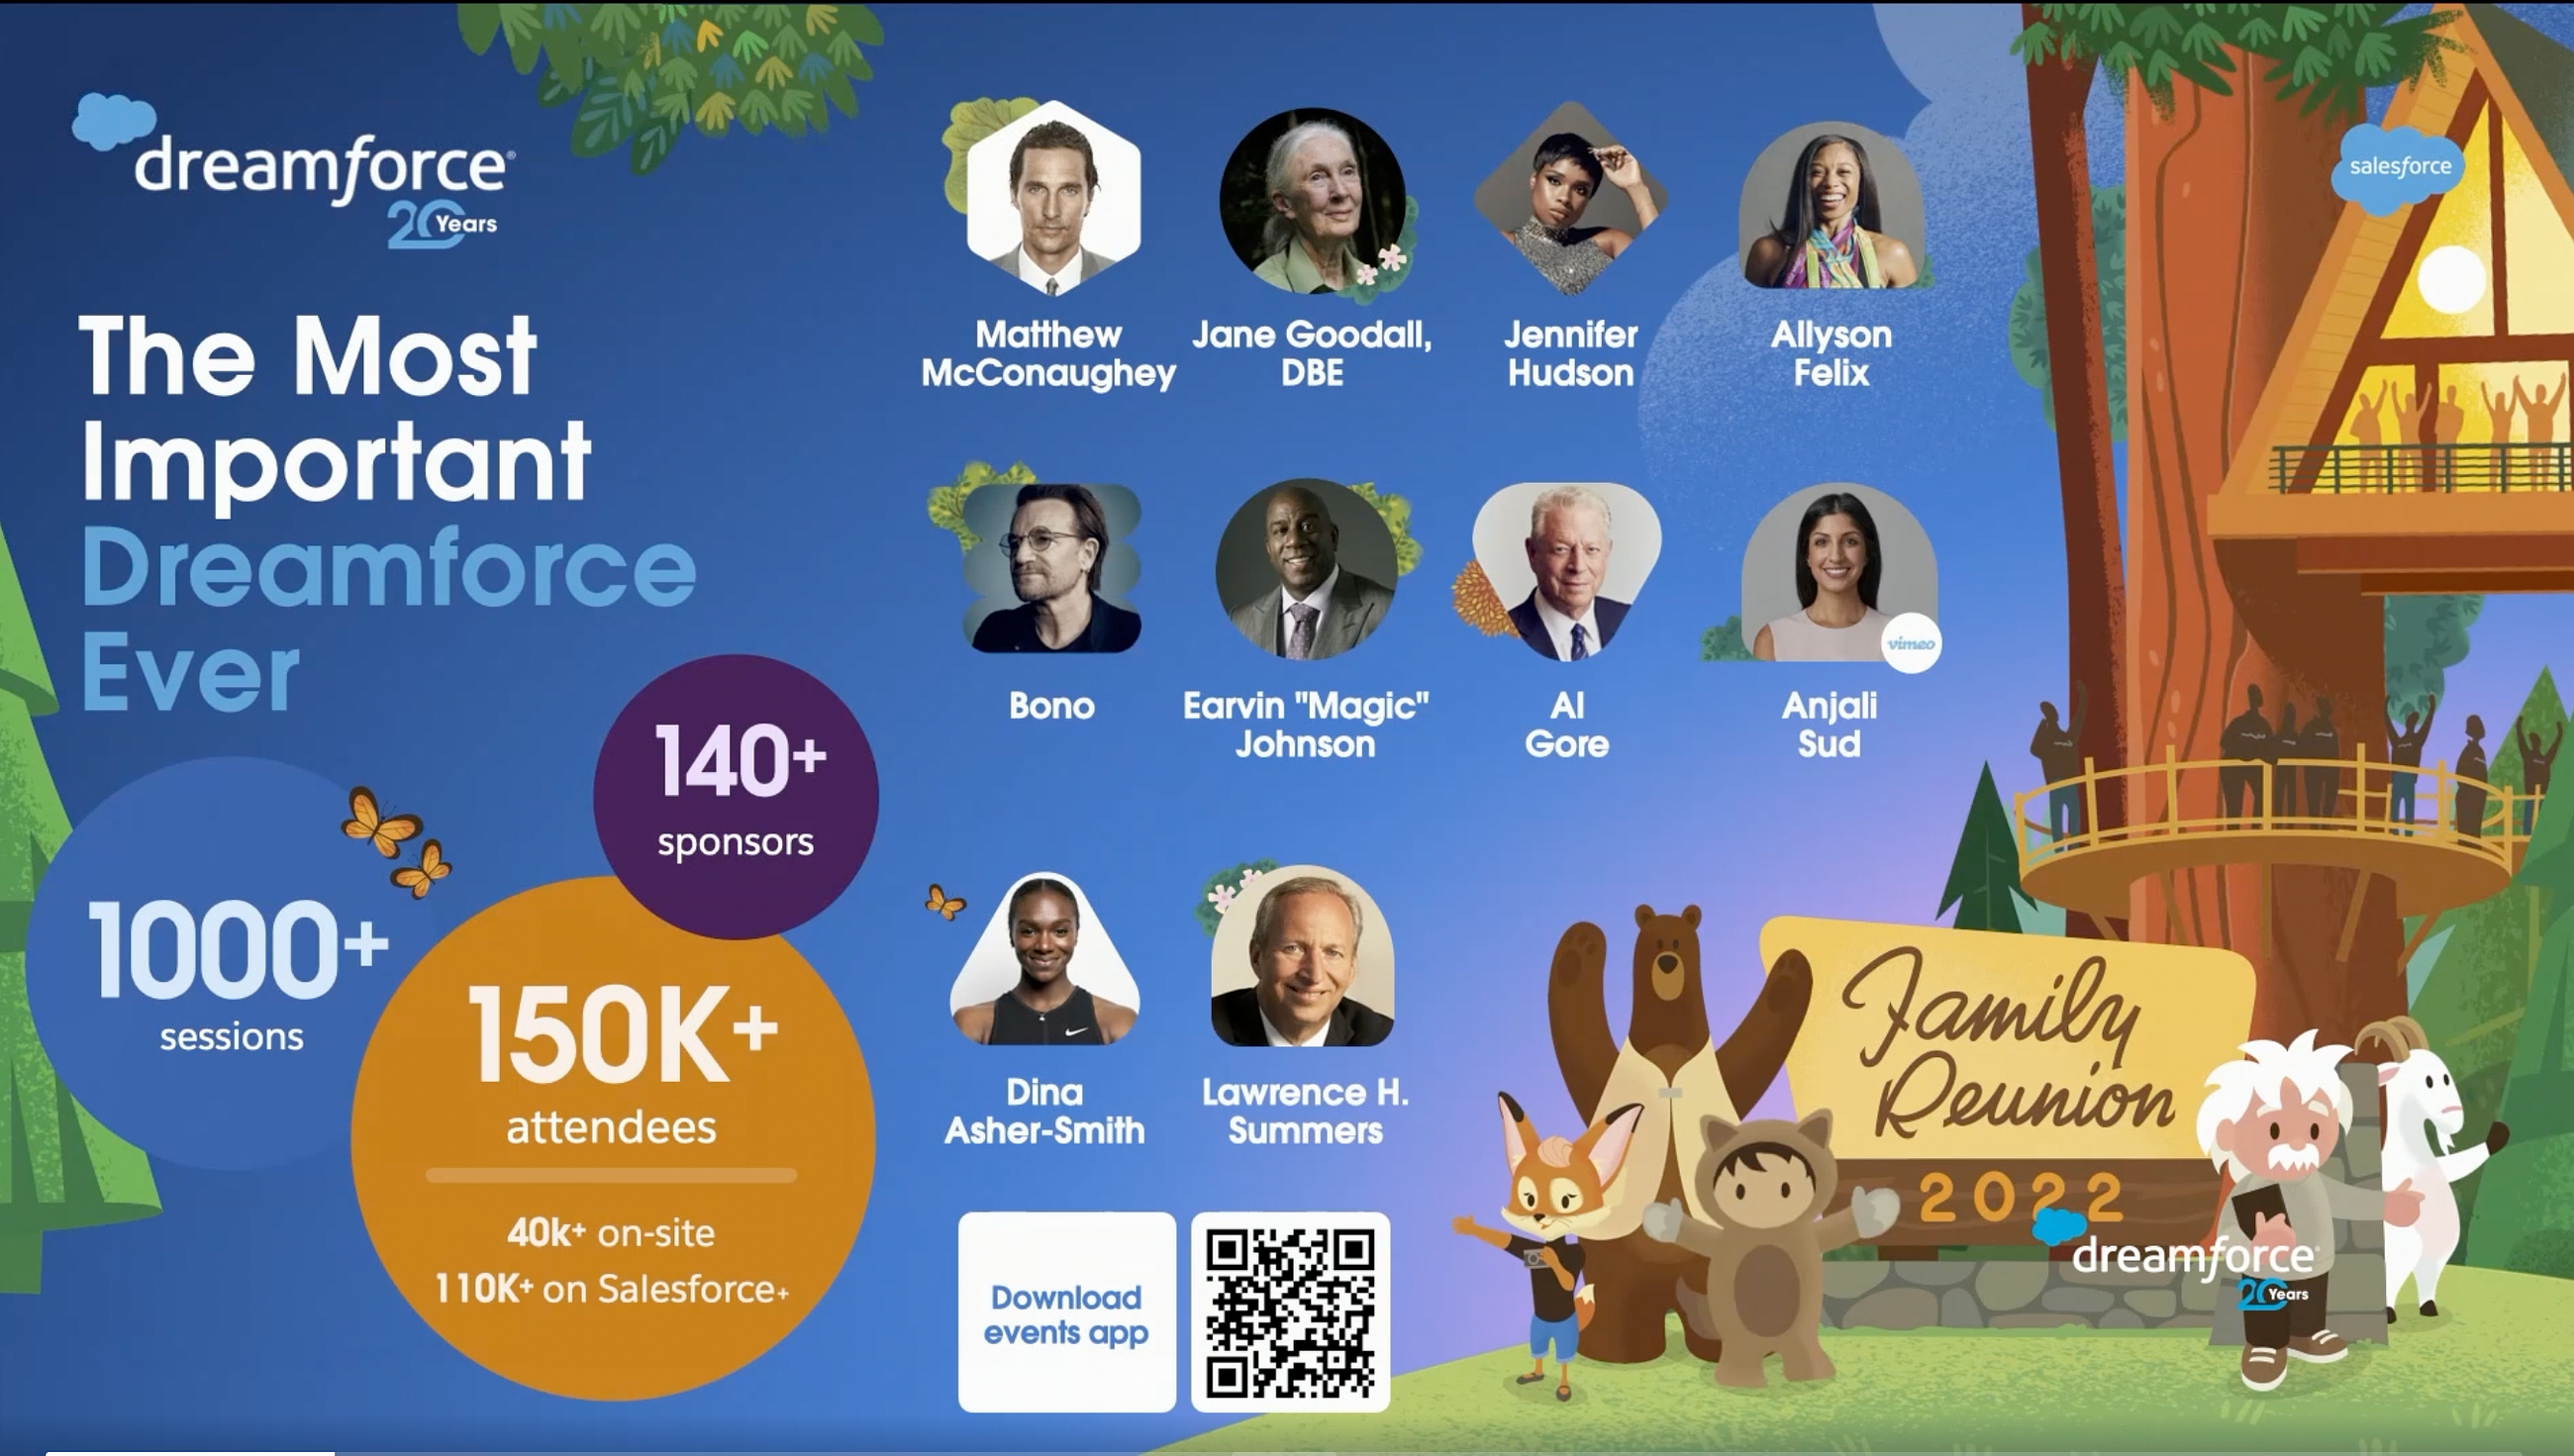 Dreamforce 2022, Salesforce 20th Event Since Its Founding